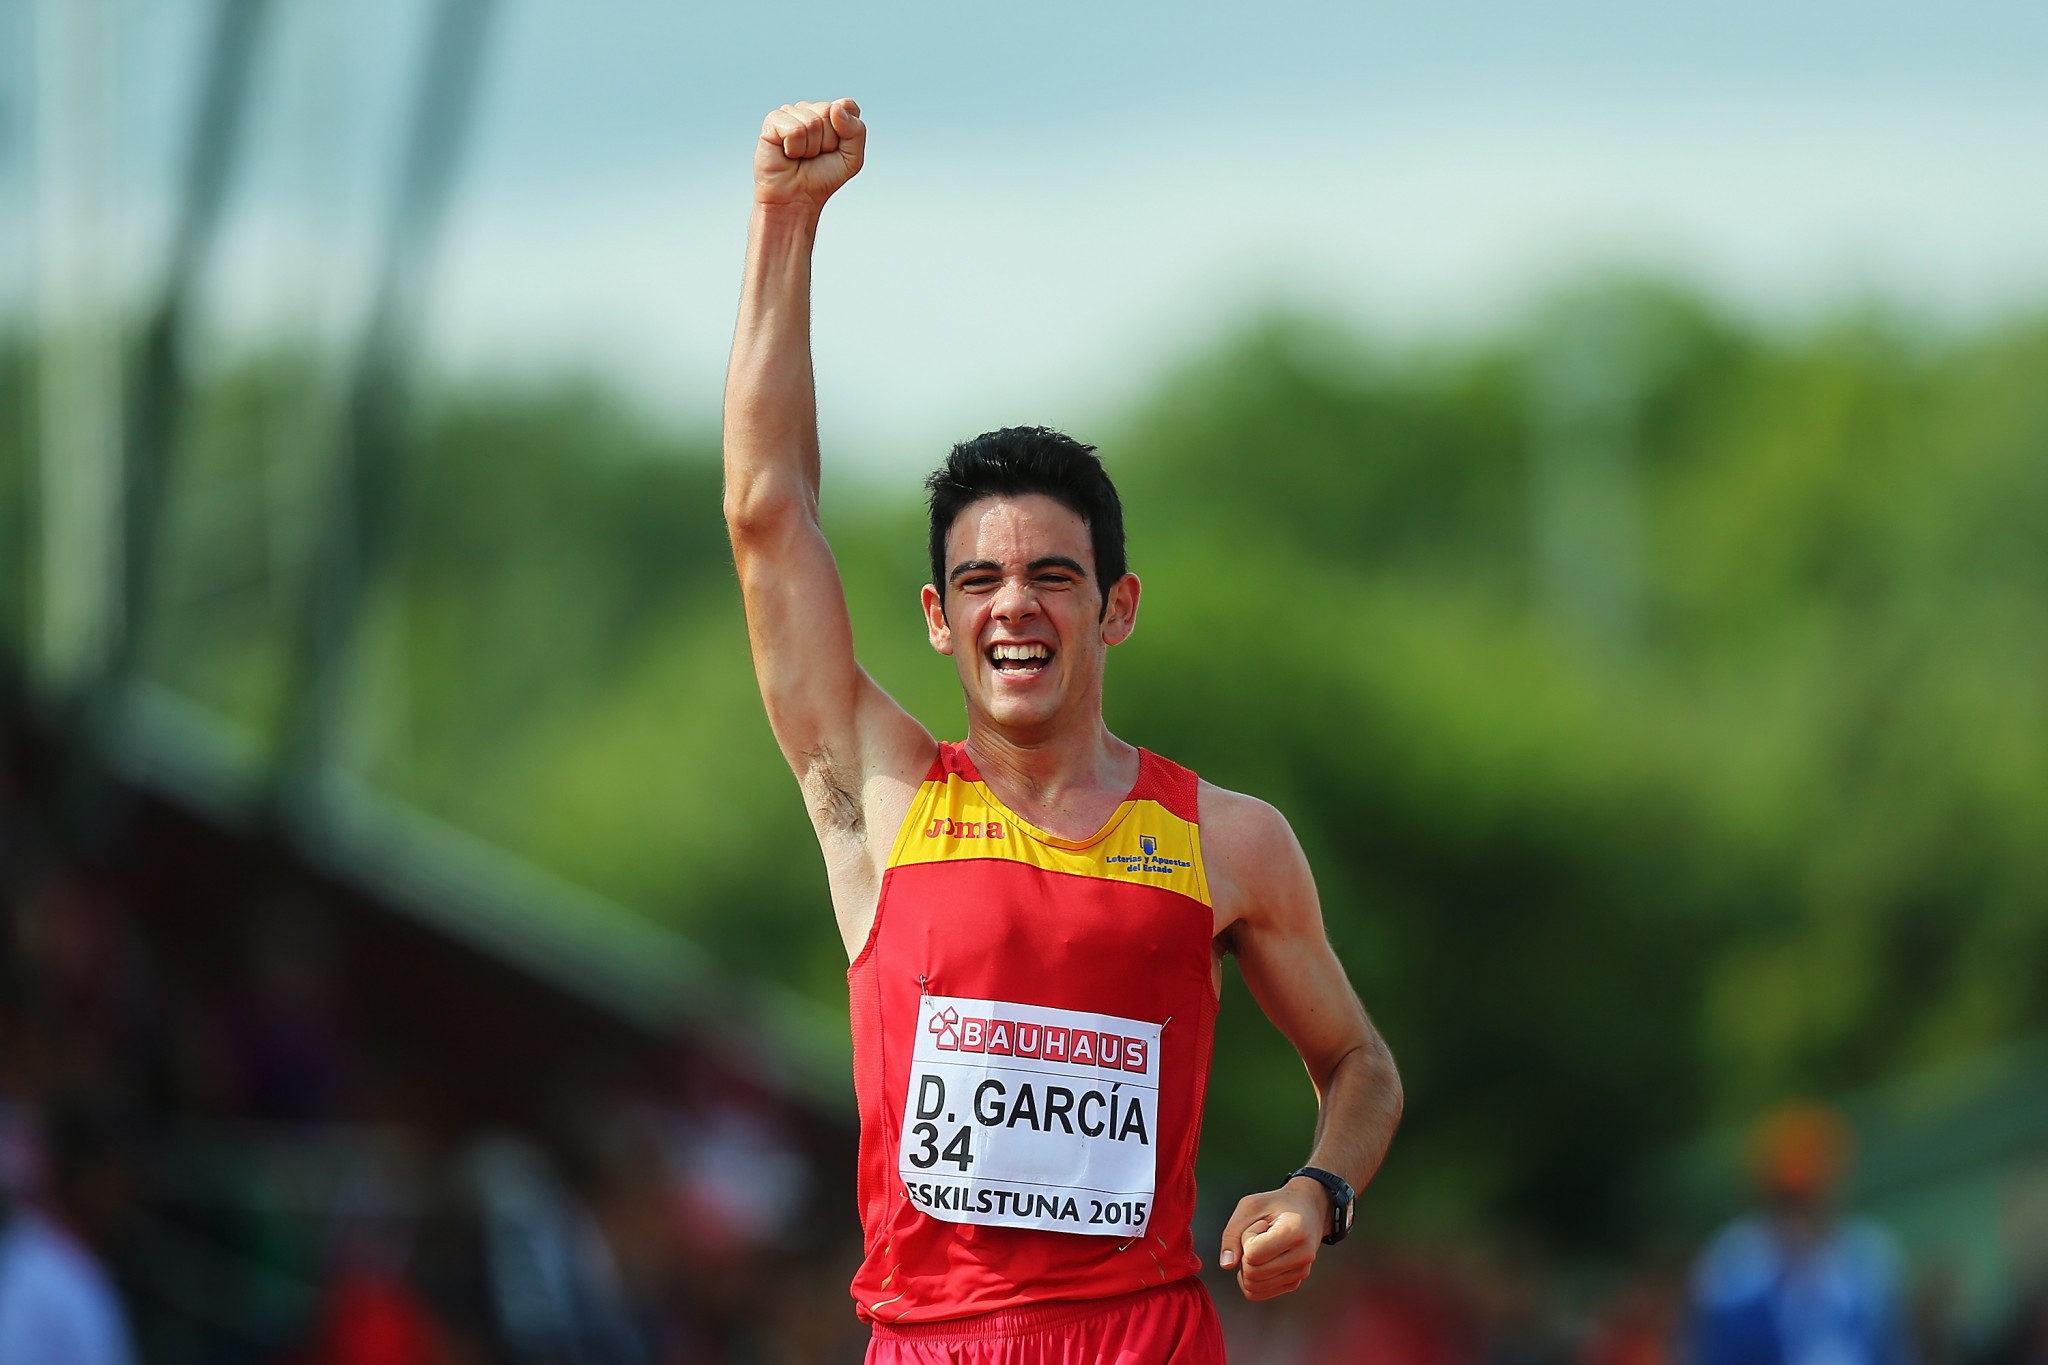 Spain's Diego García is considered the favourite in the men's 20km race ©Getty Images